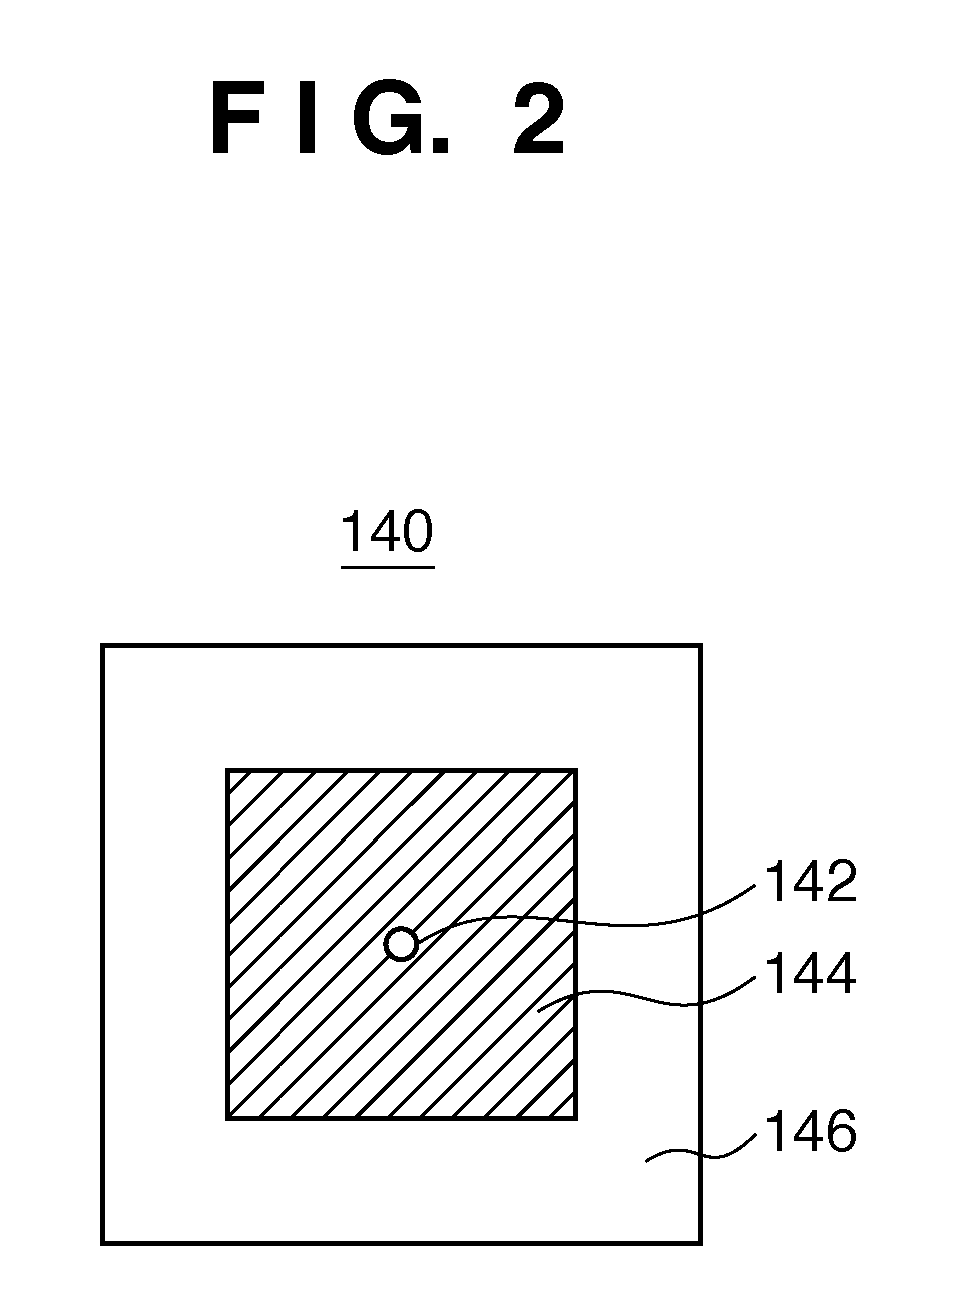 Apparatuses and methods using measurement of a flare generated in an optical system